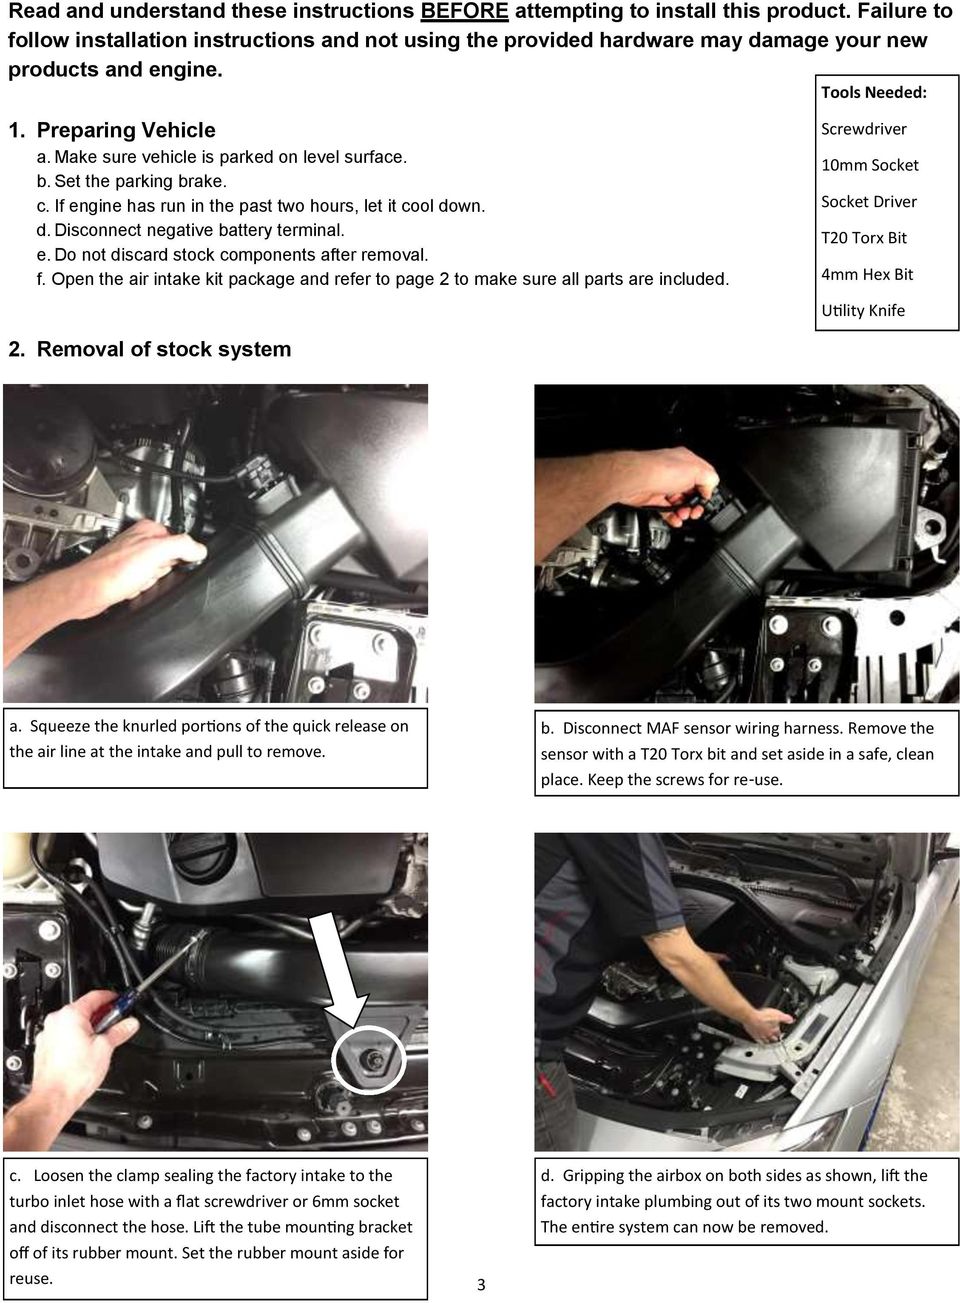 Make sure vehicle is parked on level surface. b. Set the parking brake. c. If engine has run in the past two hours, let it cool down. d. Disconnect negative battery terminal. e. Do not discard stock components after removal.